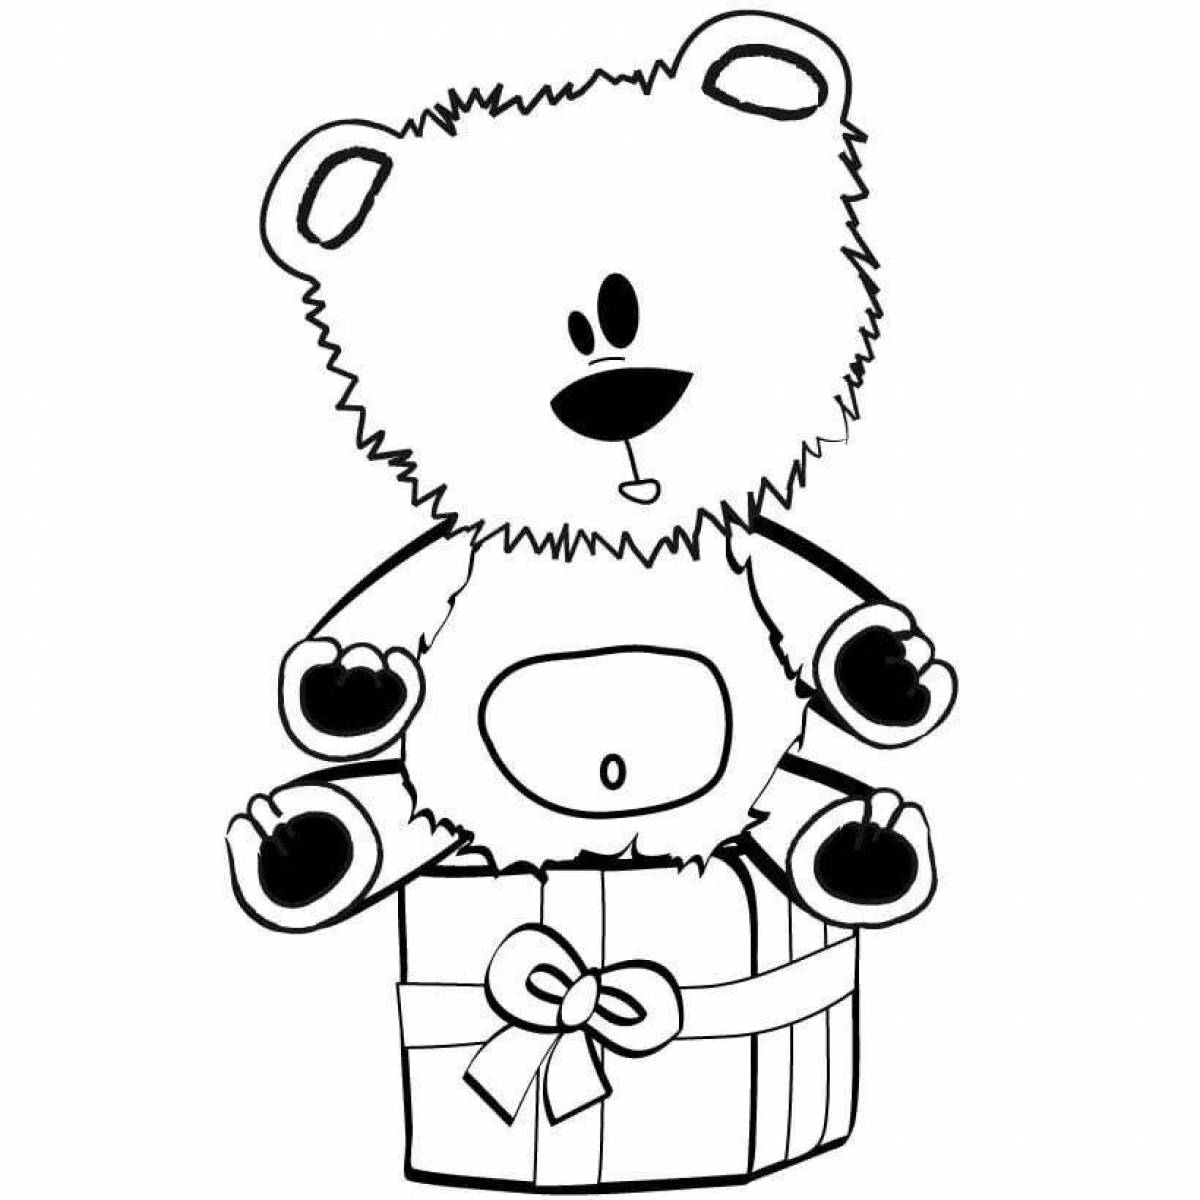 Drawing of a mischievous teddy bear